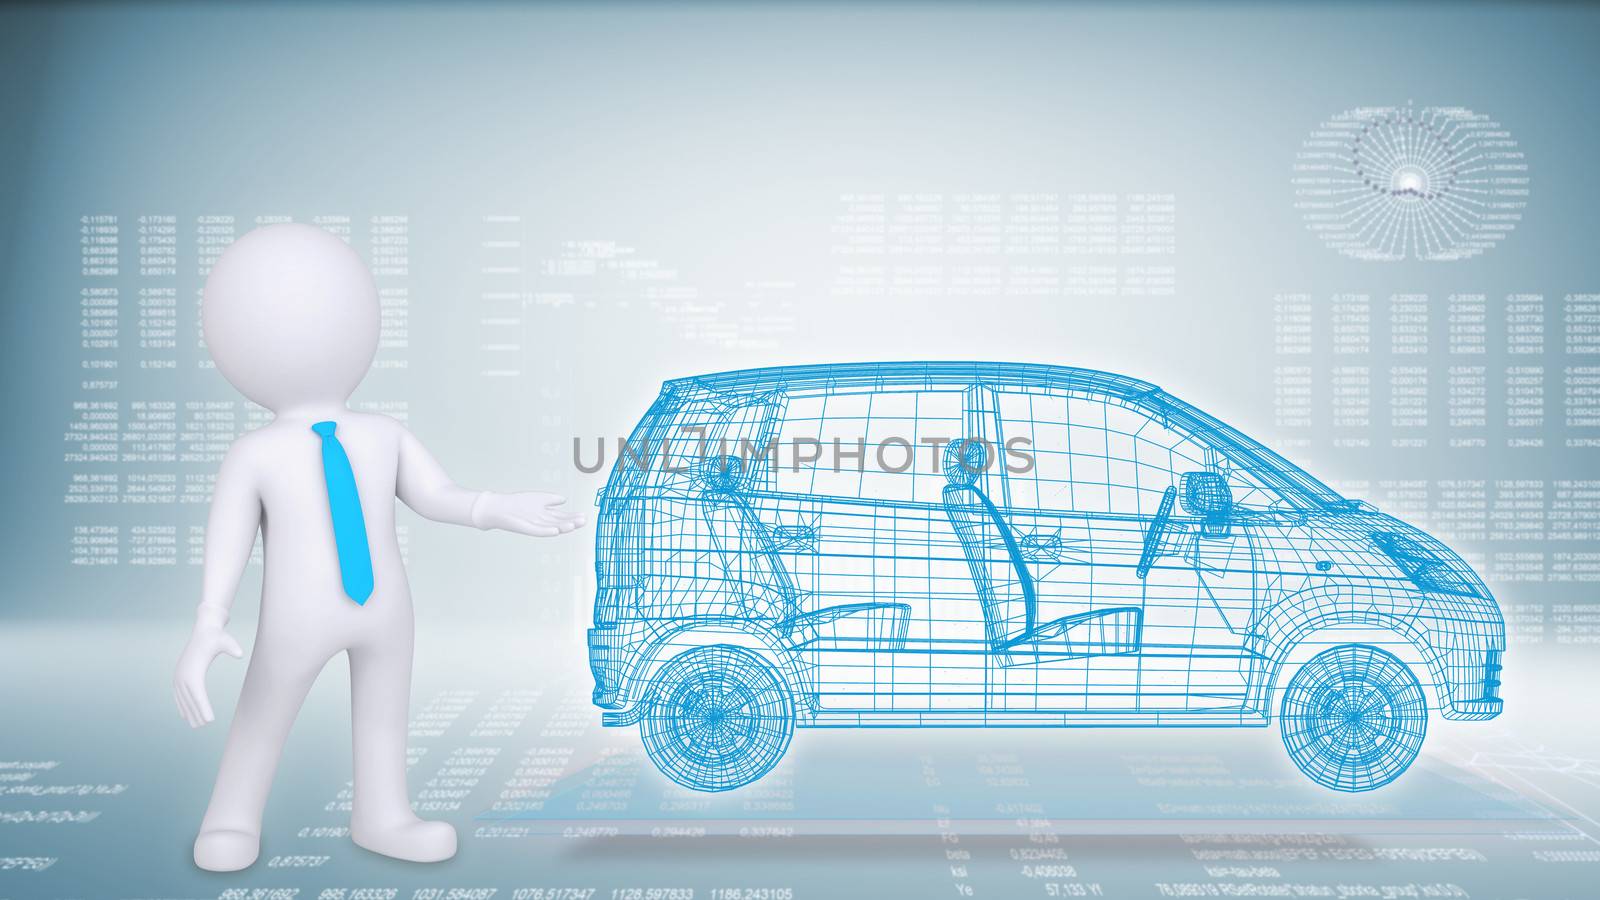 People and hi-tech car on a blue background. The concept of future technologies knowledge based